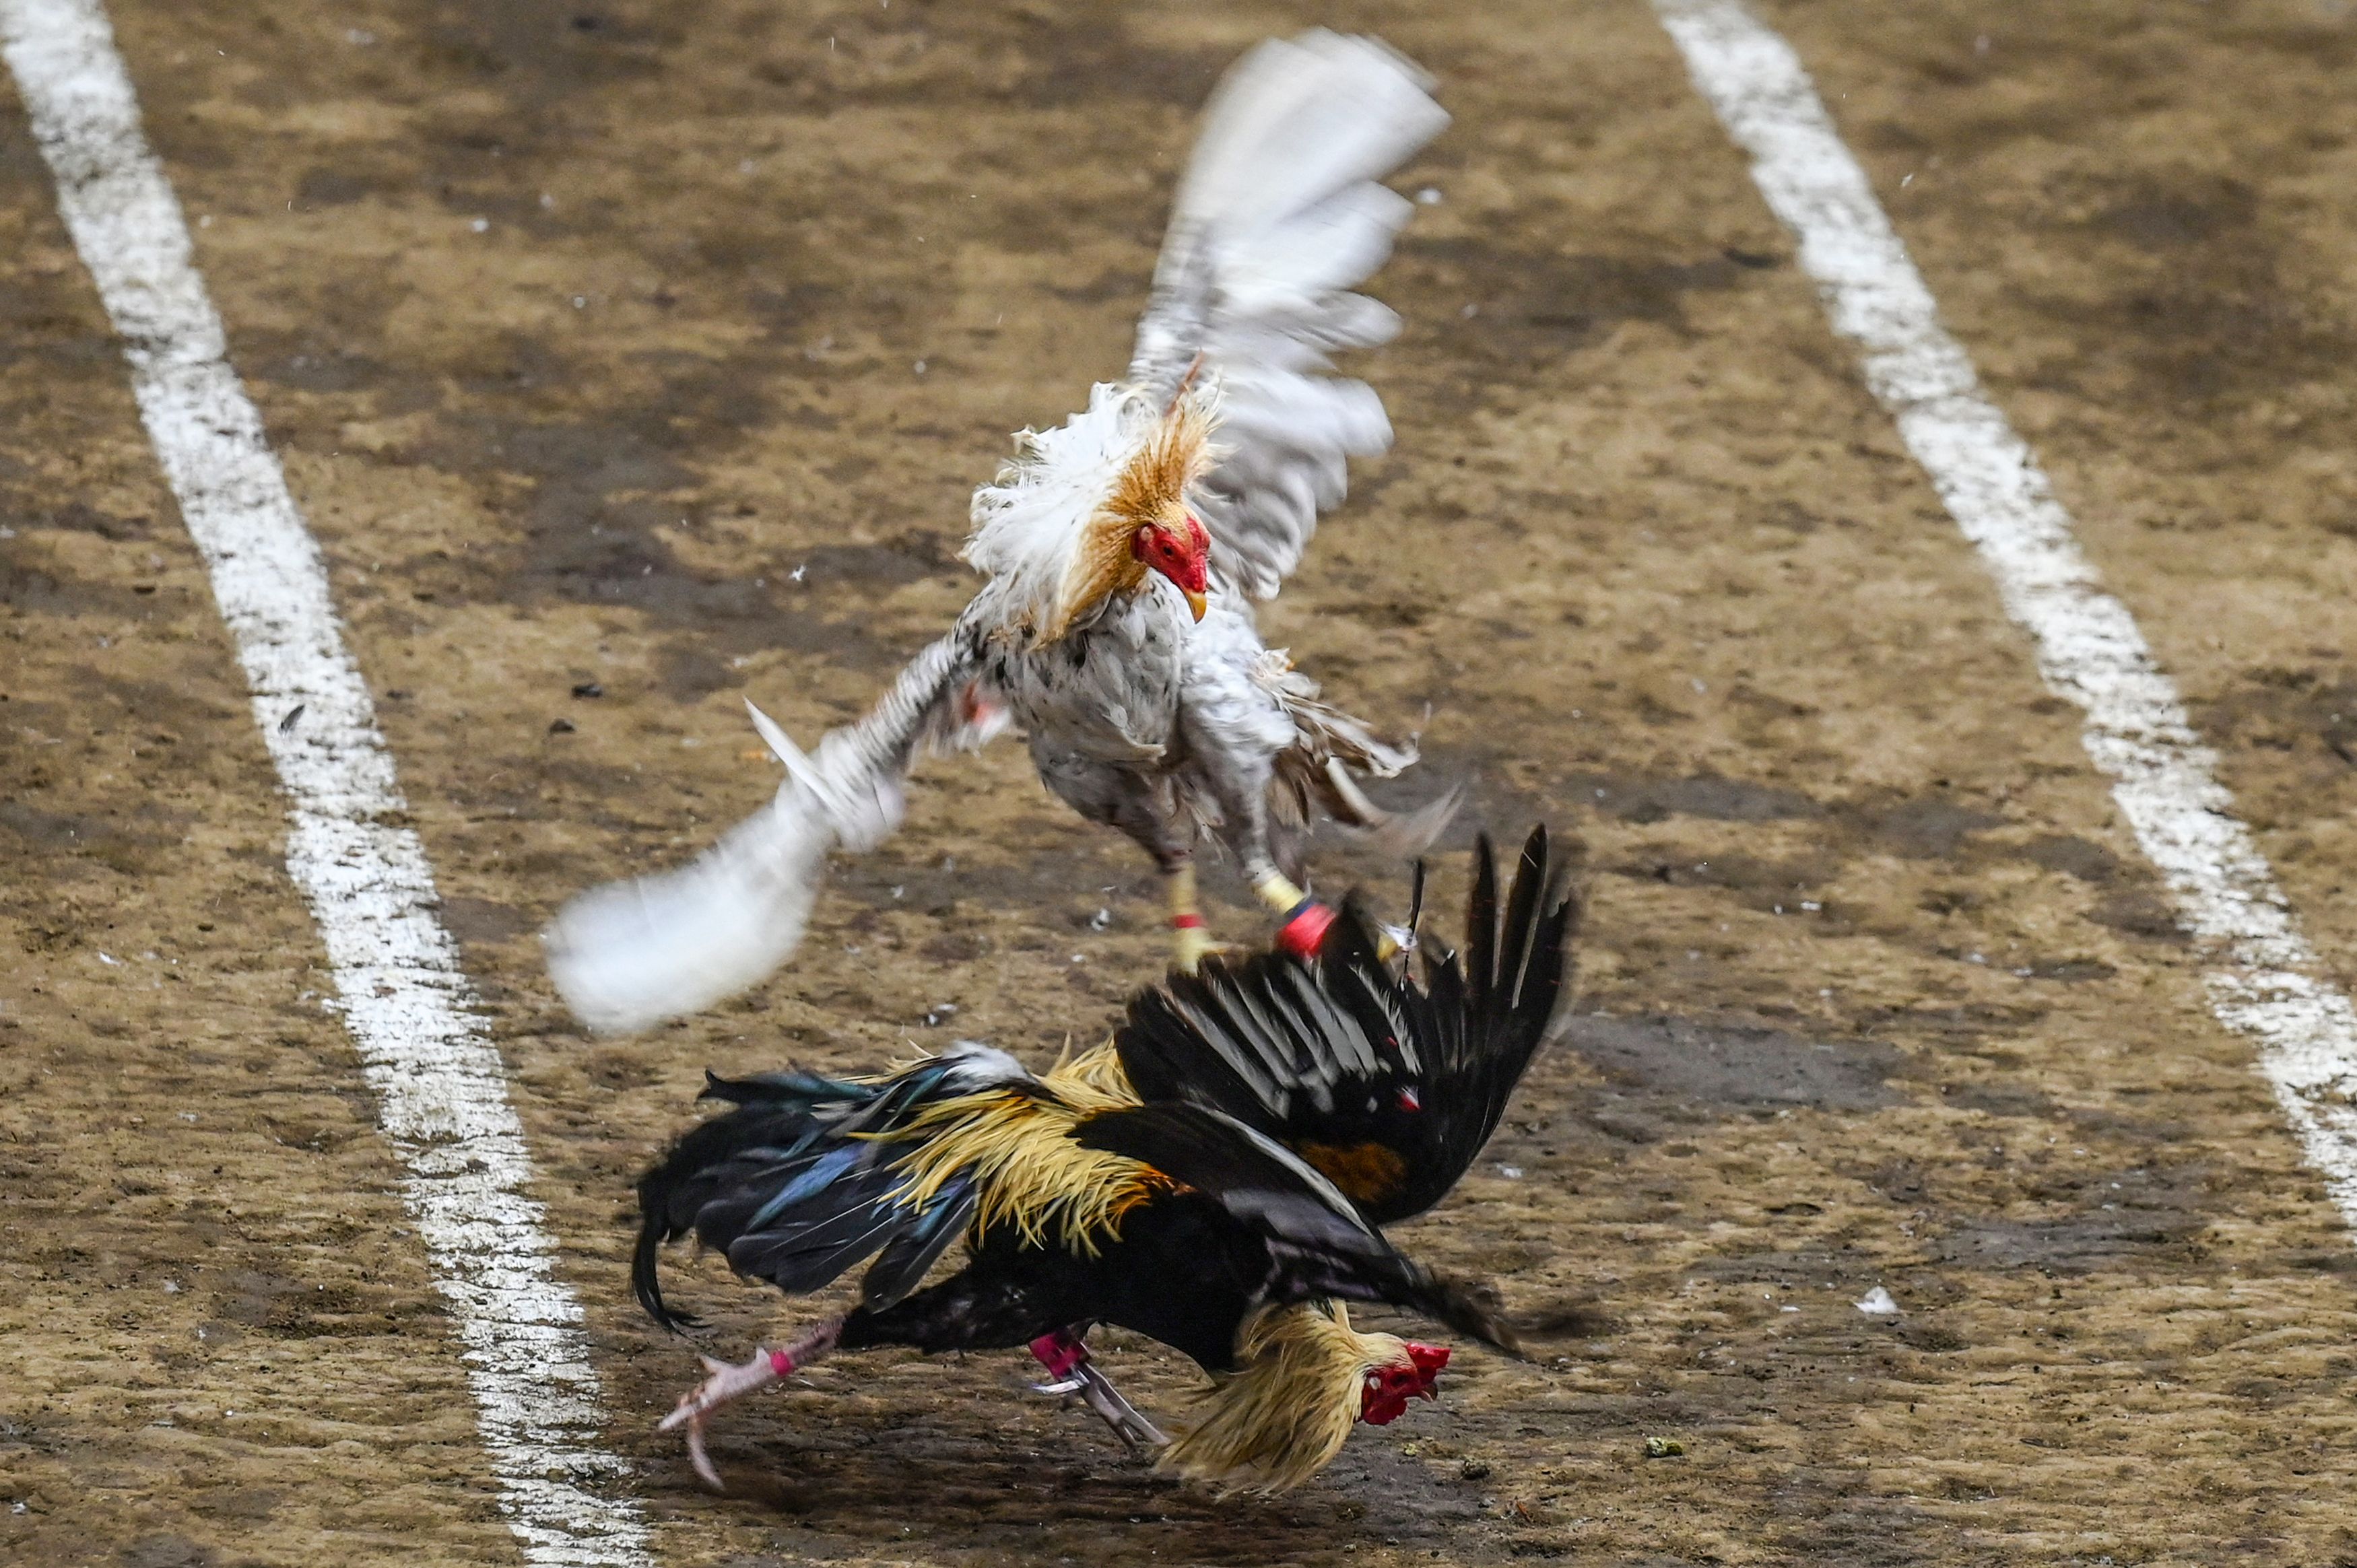 7 members of an Alabama family are sentenced for managing a “large-scale” cockfighting ring